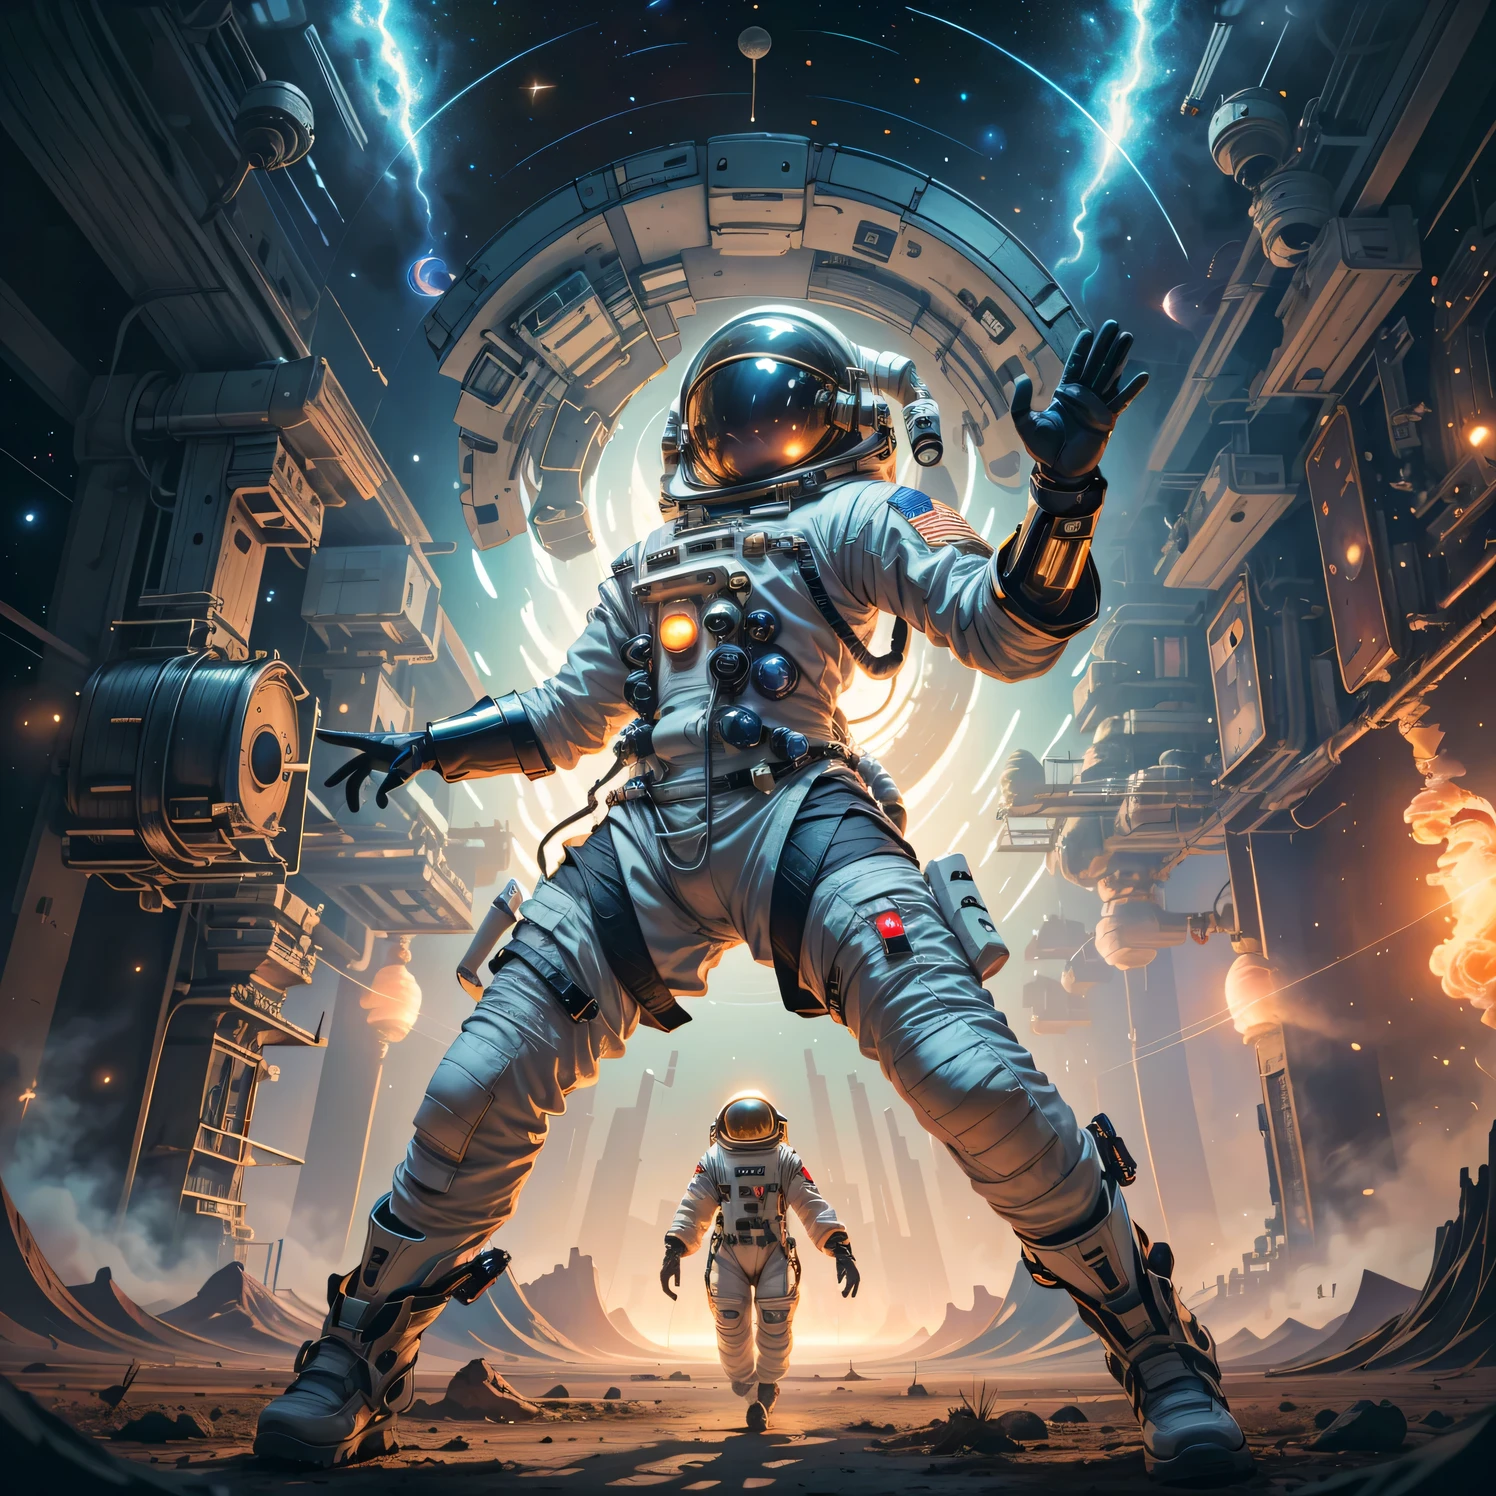 (best quality,4k,8k,highres,masterpiece:1.37),ultra-detailed,(realistic,photorealistic,photo-realistic:1.5),cosmic wanderer, 1woman, psychedelic traveler,oneironaut,astronaut,mecha pilot,mix of sci-fi and fantasy,dynamic composition,nebulae,galactic landscape,giant spaceship with intricate details,wide angle, full body shot,(An astronaut woman floating in a space station:1.6),(dynamic pose:1.6),tianfeng1,(cosmic energy flowing through the body),vibrant colors and surreal atmosphere,PsyAI,dream-like surreal elements,extraterrestrial creatures exploring alongside,interstellar journey through unknown realms,majestic celestial bodies creating a sense of awe,(otherworldly landscapes and architecture),cosmic dust and particles illuminating the scene,sparkling stars and constellations forming intricate patterns,(tianfeng1),(the woman is wearing a futuristic suit with glowing accents),(mechanical elements complementing the organic forms:1.37),rendered with attention to smallest details and textures,(dynamic composition with a sense of movement and energy:1.5),strong sense of depth and three-dimensionality,(moody lighting and dramatic shadows),unique perspectives and unconventional angles,revealing hidden wonders of the cosmos,(immersive and captivating sci-fi atmosphere:1.4),bringing together the wonders of science and the magic of dreams.